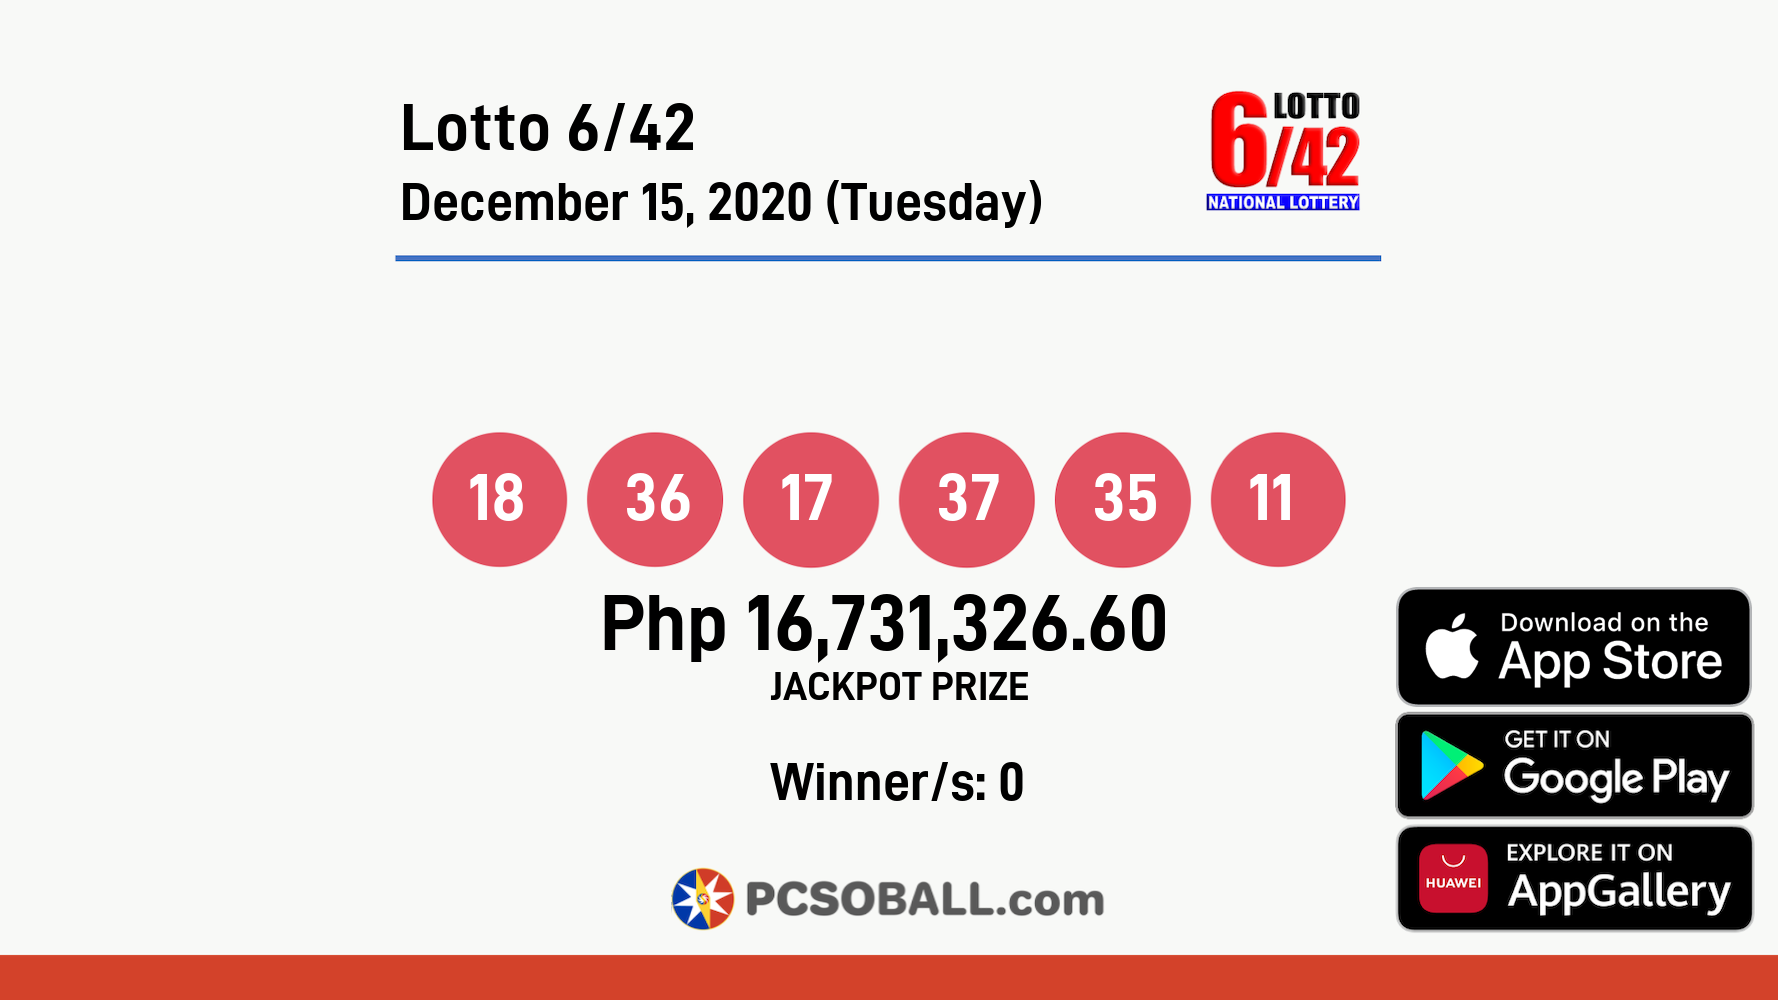 Lotto 6/42 December 15, 2020 (Tuesday) Result